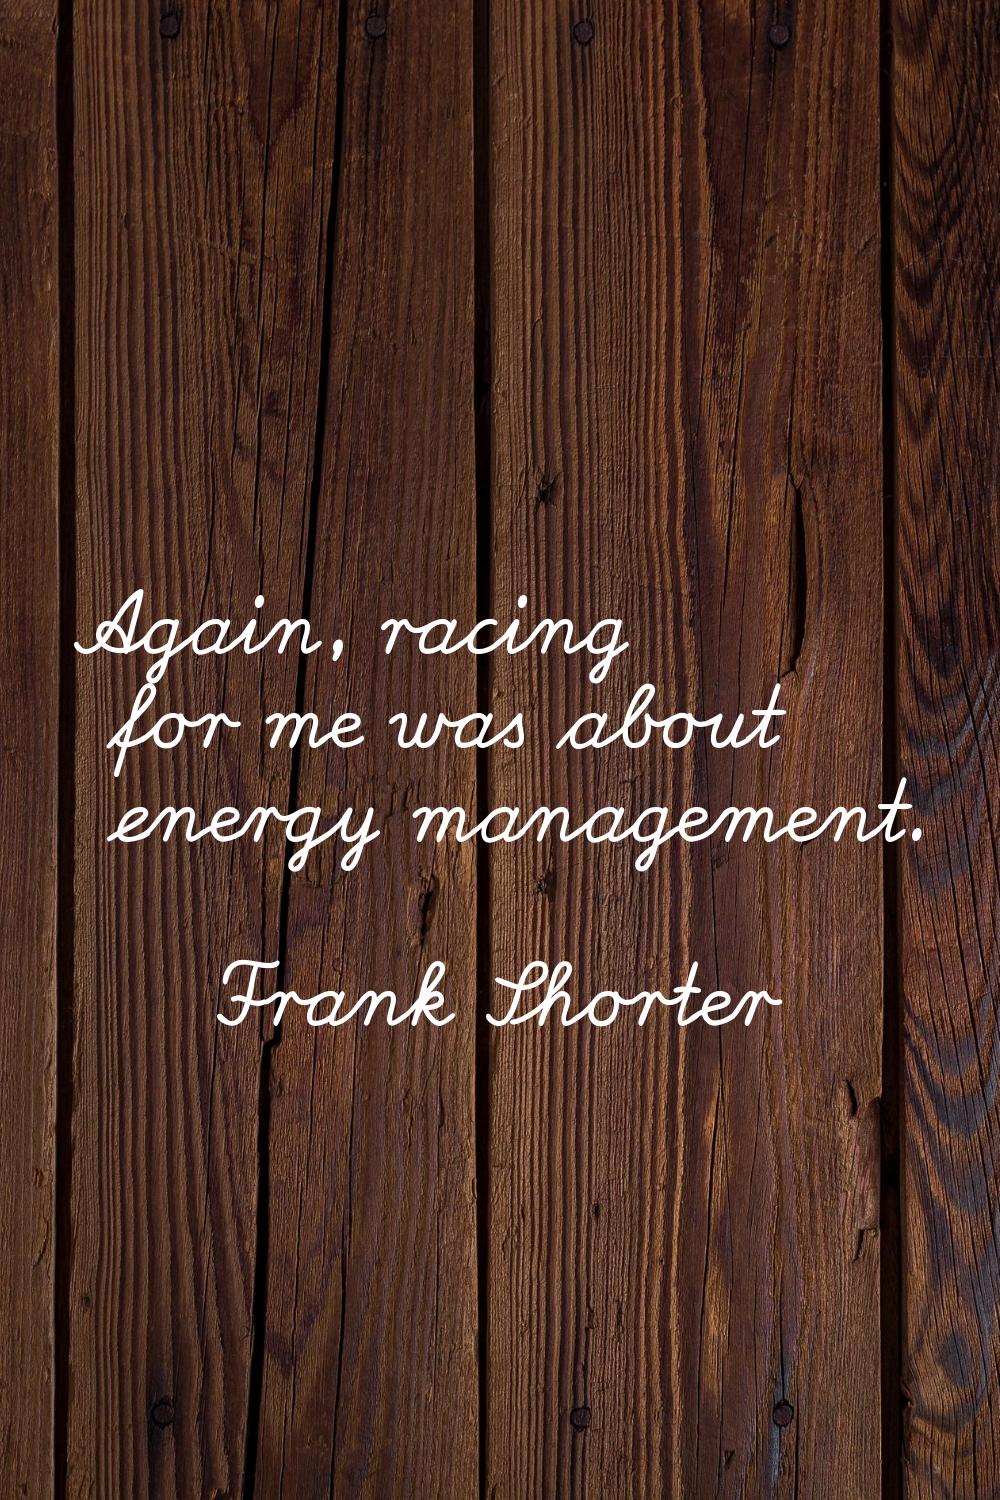 Again, racing for me was about energy management.